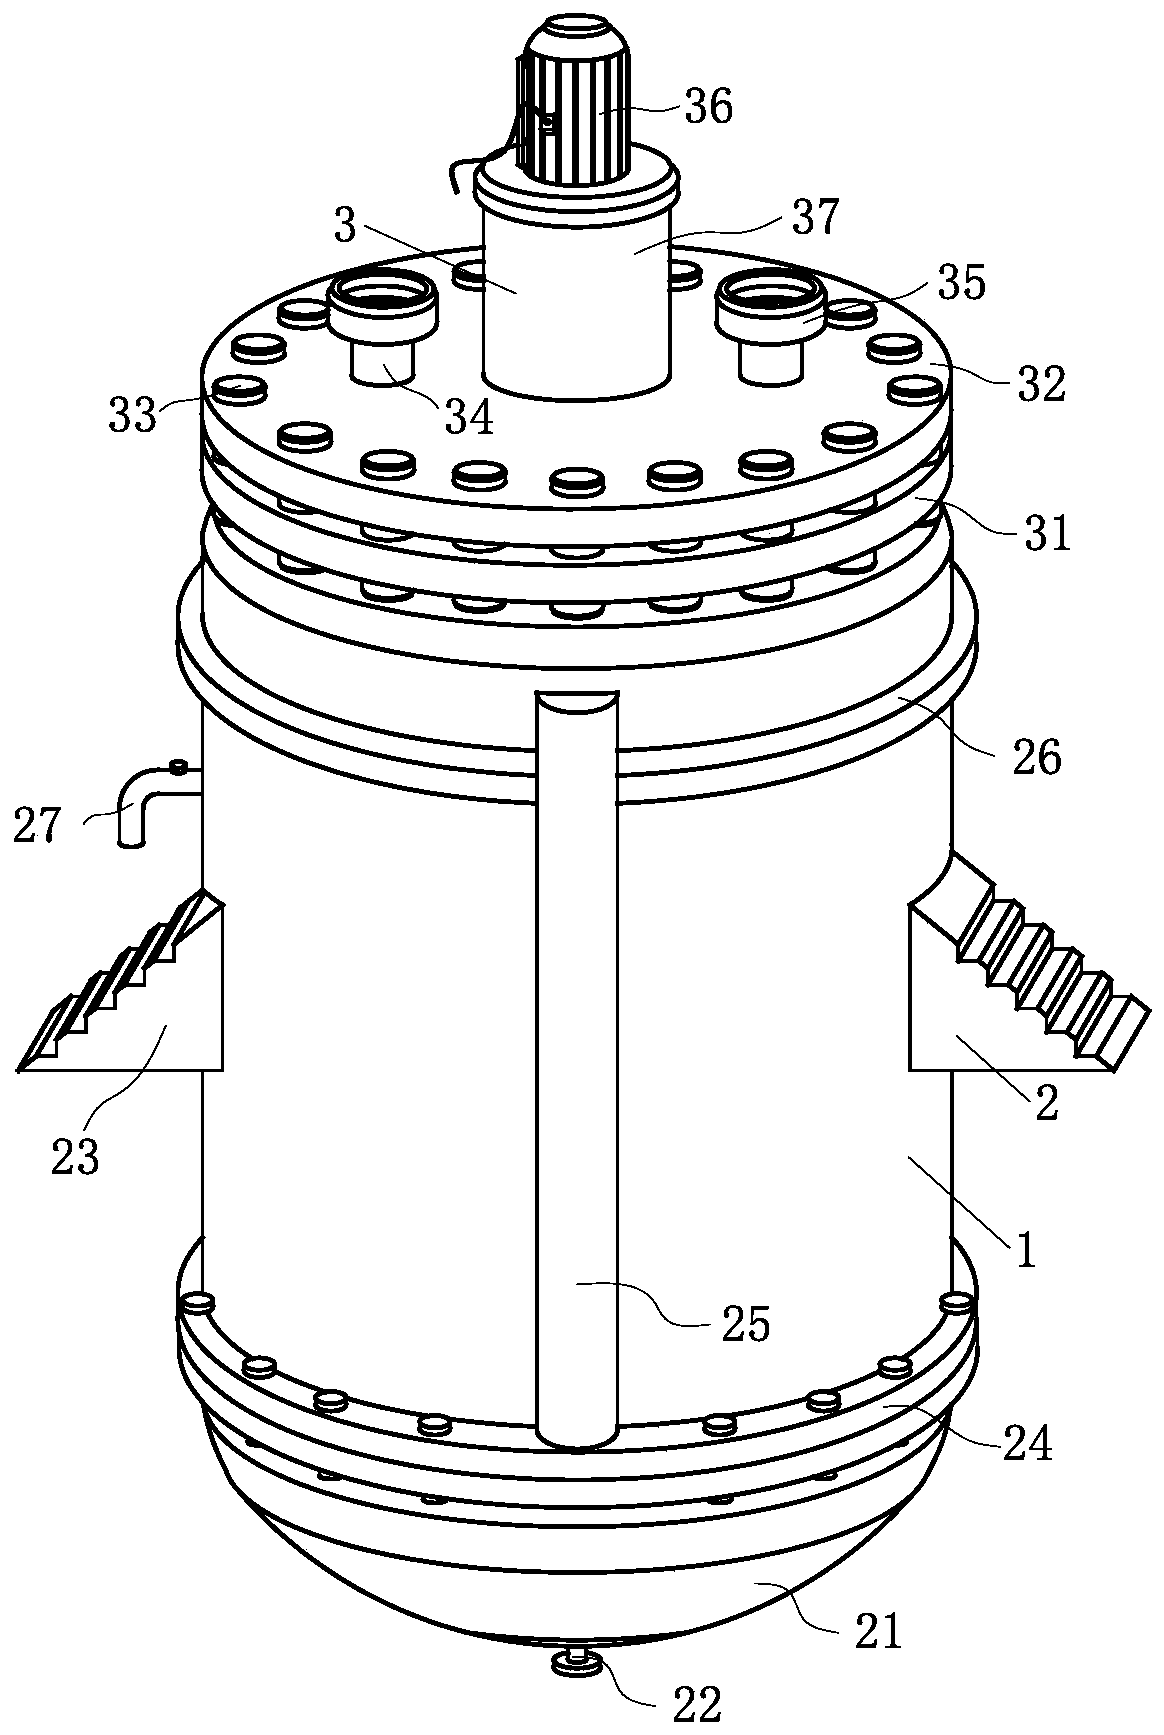 Reaction kettle convenient for layered disassembling of filter screens